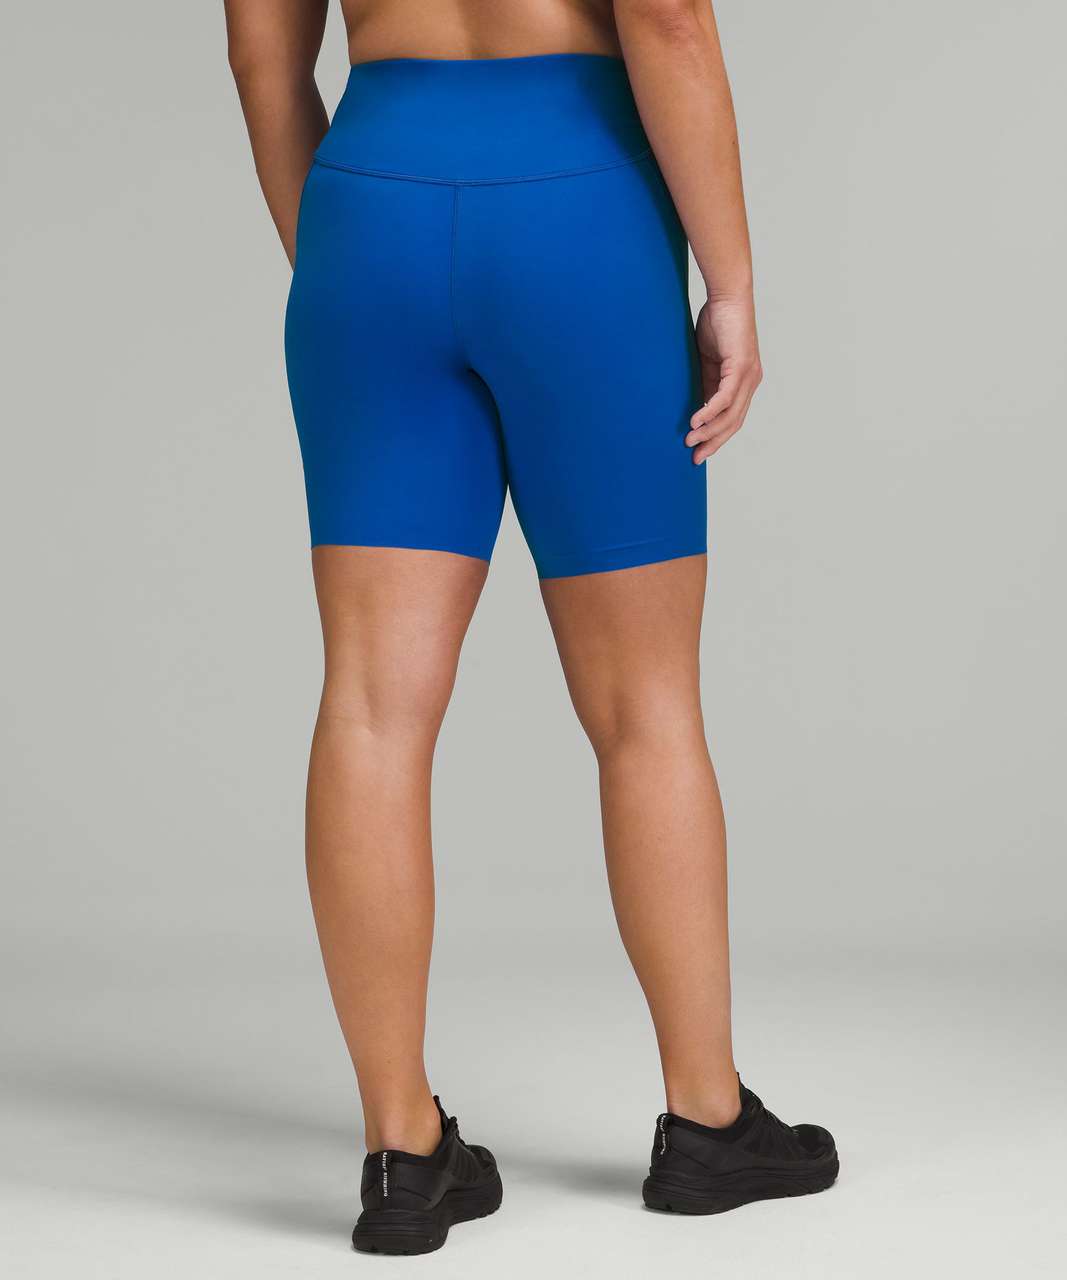 lululemon athletica Base Pace High-rise Short 8 Online Only in